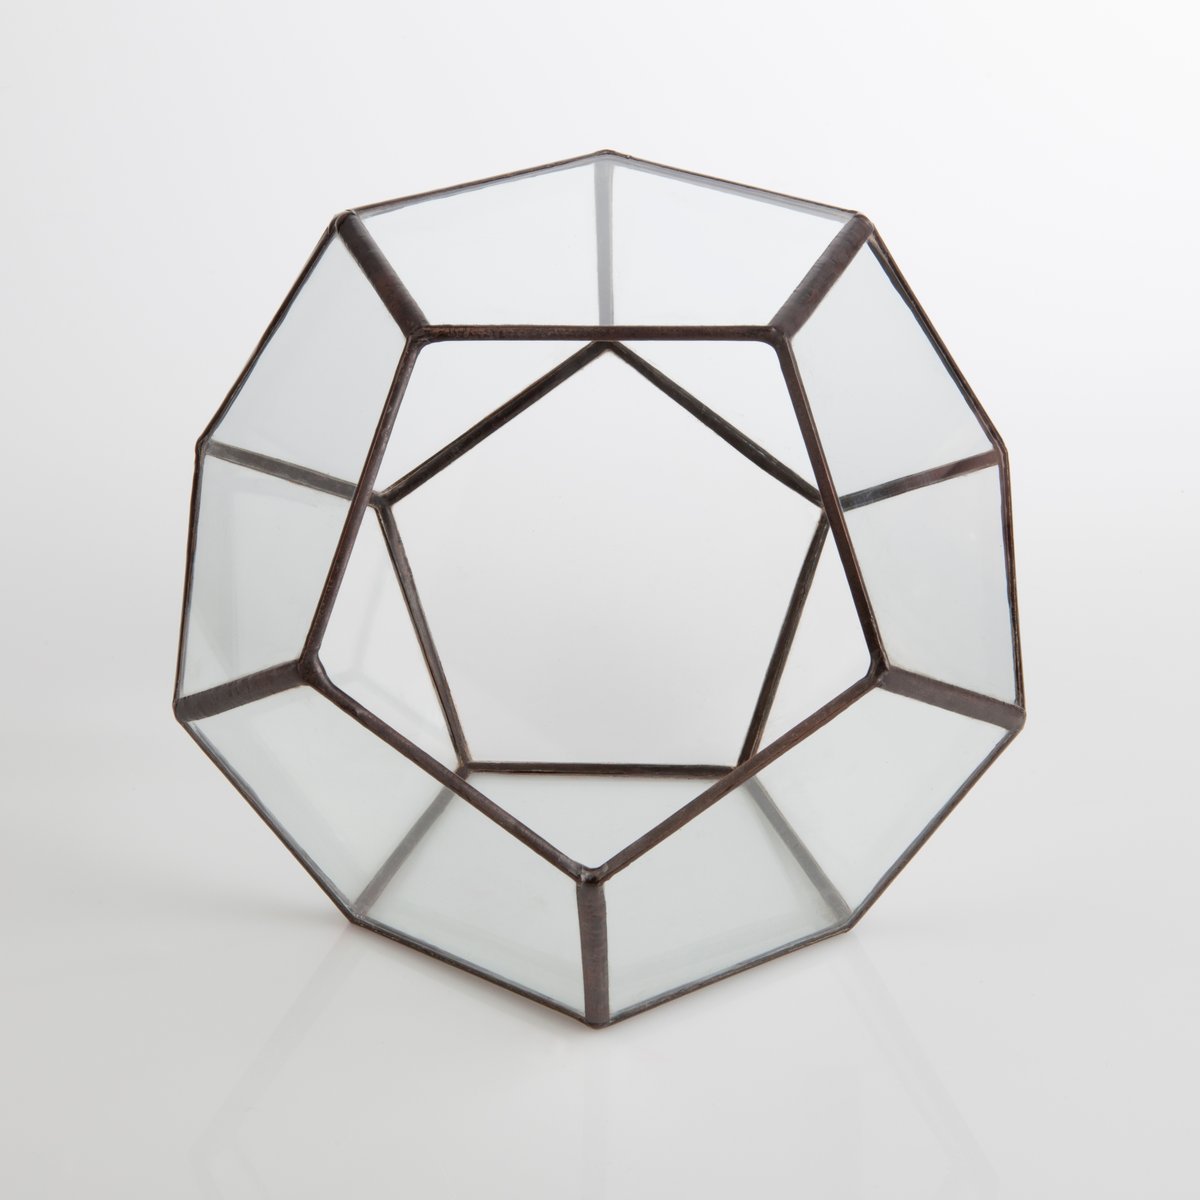 Image of Large Dodecahedron Terrarium